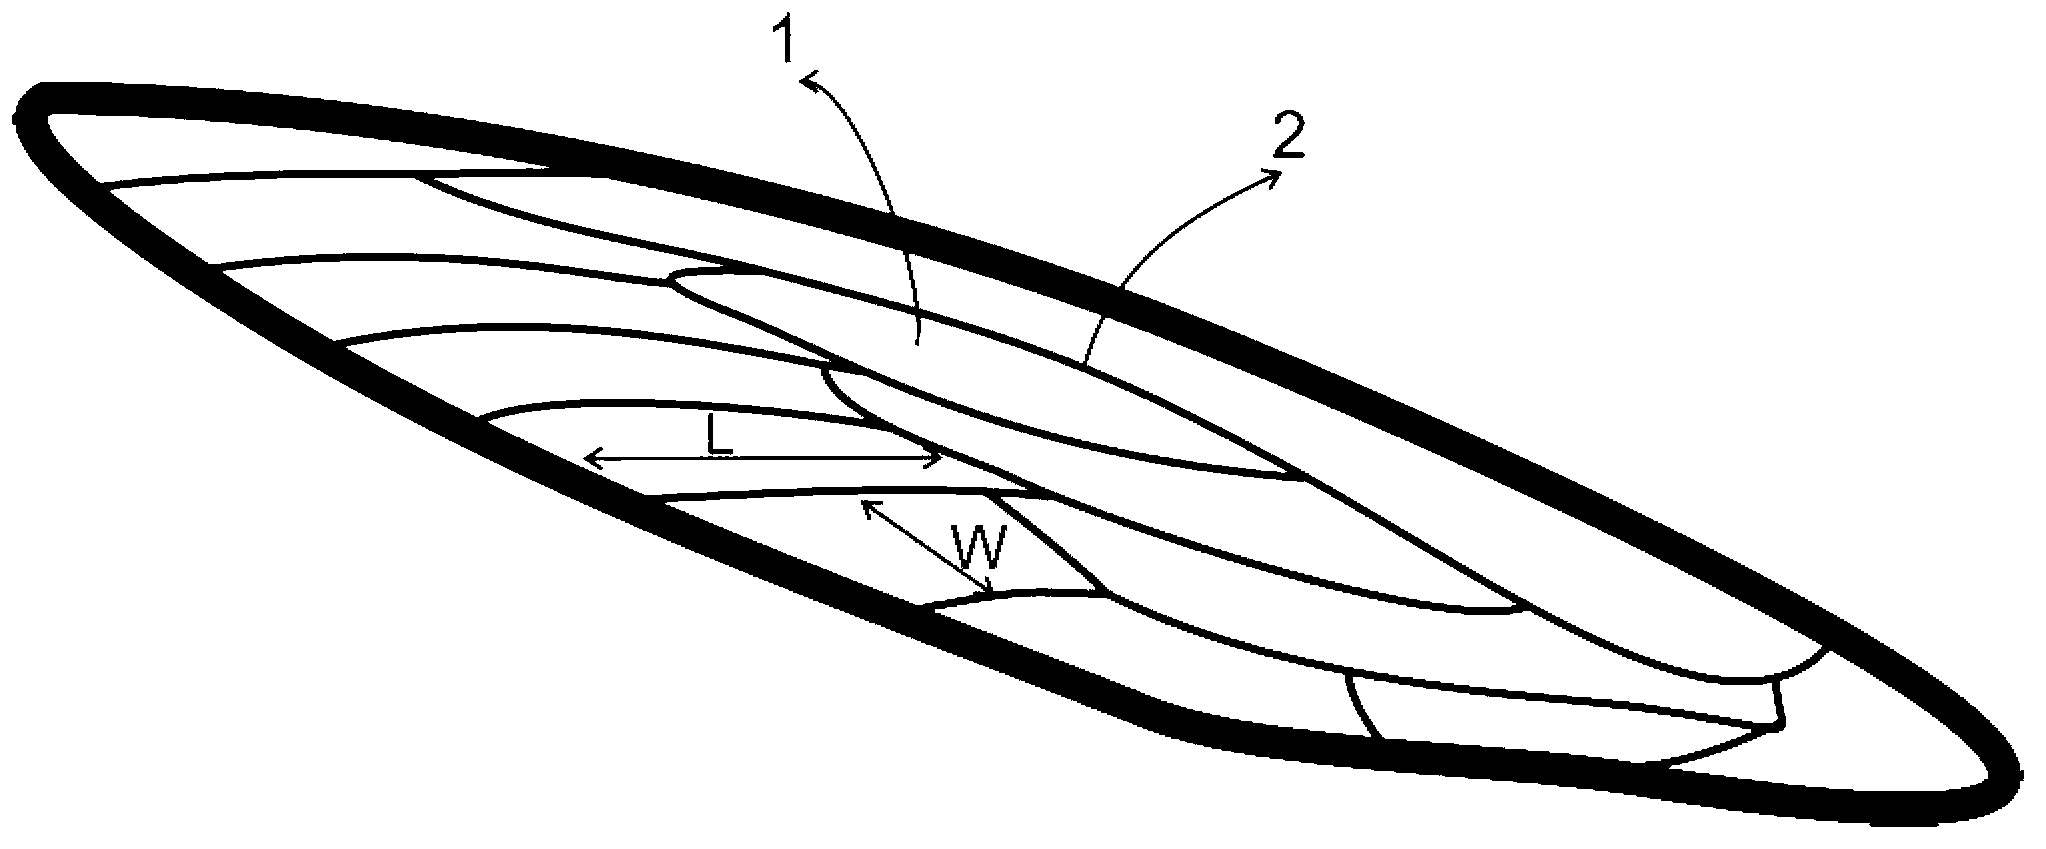 Laser wire-filling local bionic-texture manufacturing method and equipment for metal functional surfaces